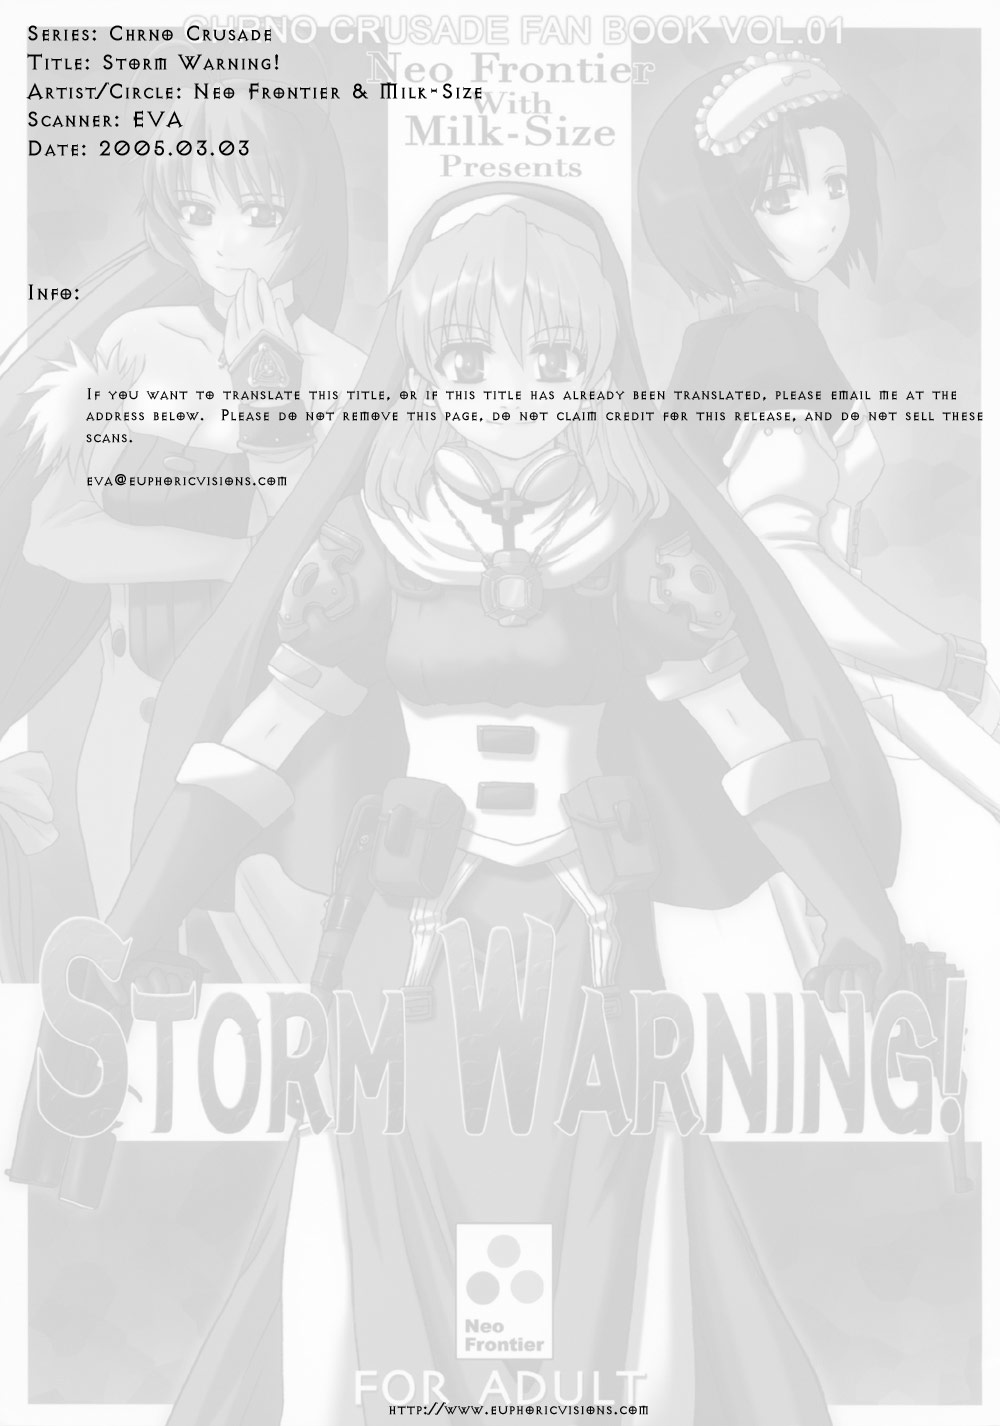 [Neo Frontier with Milk Size] Storm Warning (Chrno Crusade) 